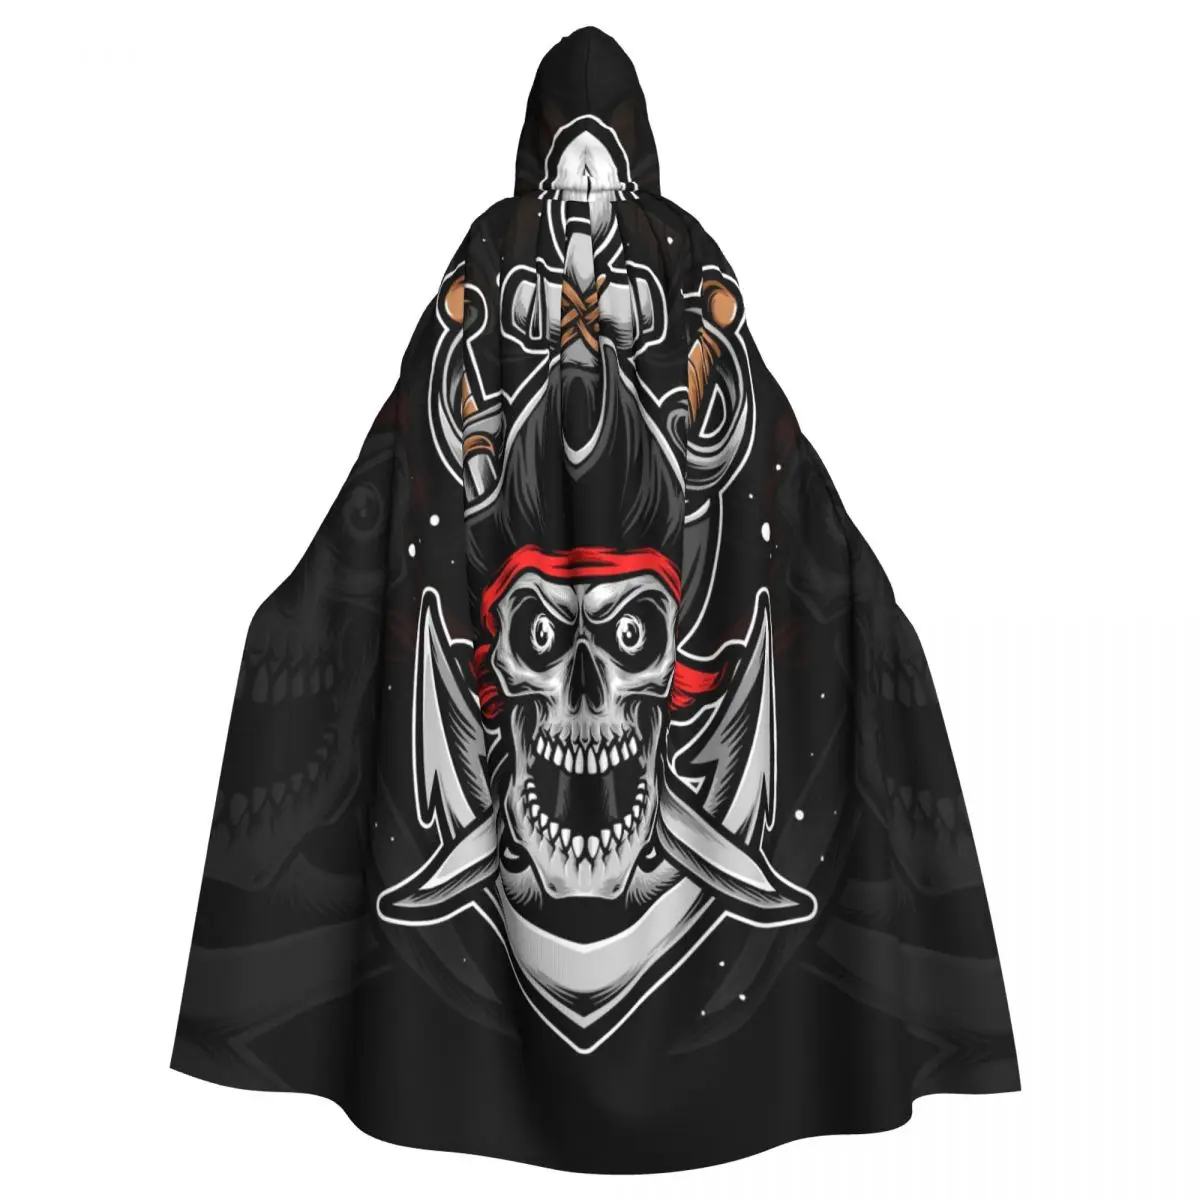 

Unisex Witch Party Reversible Hooded Adult Vampires Cape Cloak Skull Pirate With Sword And Anchor